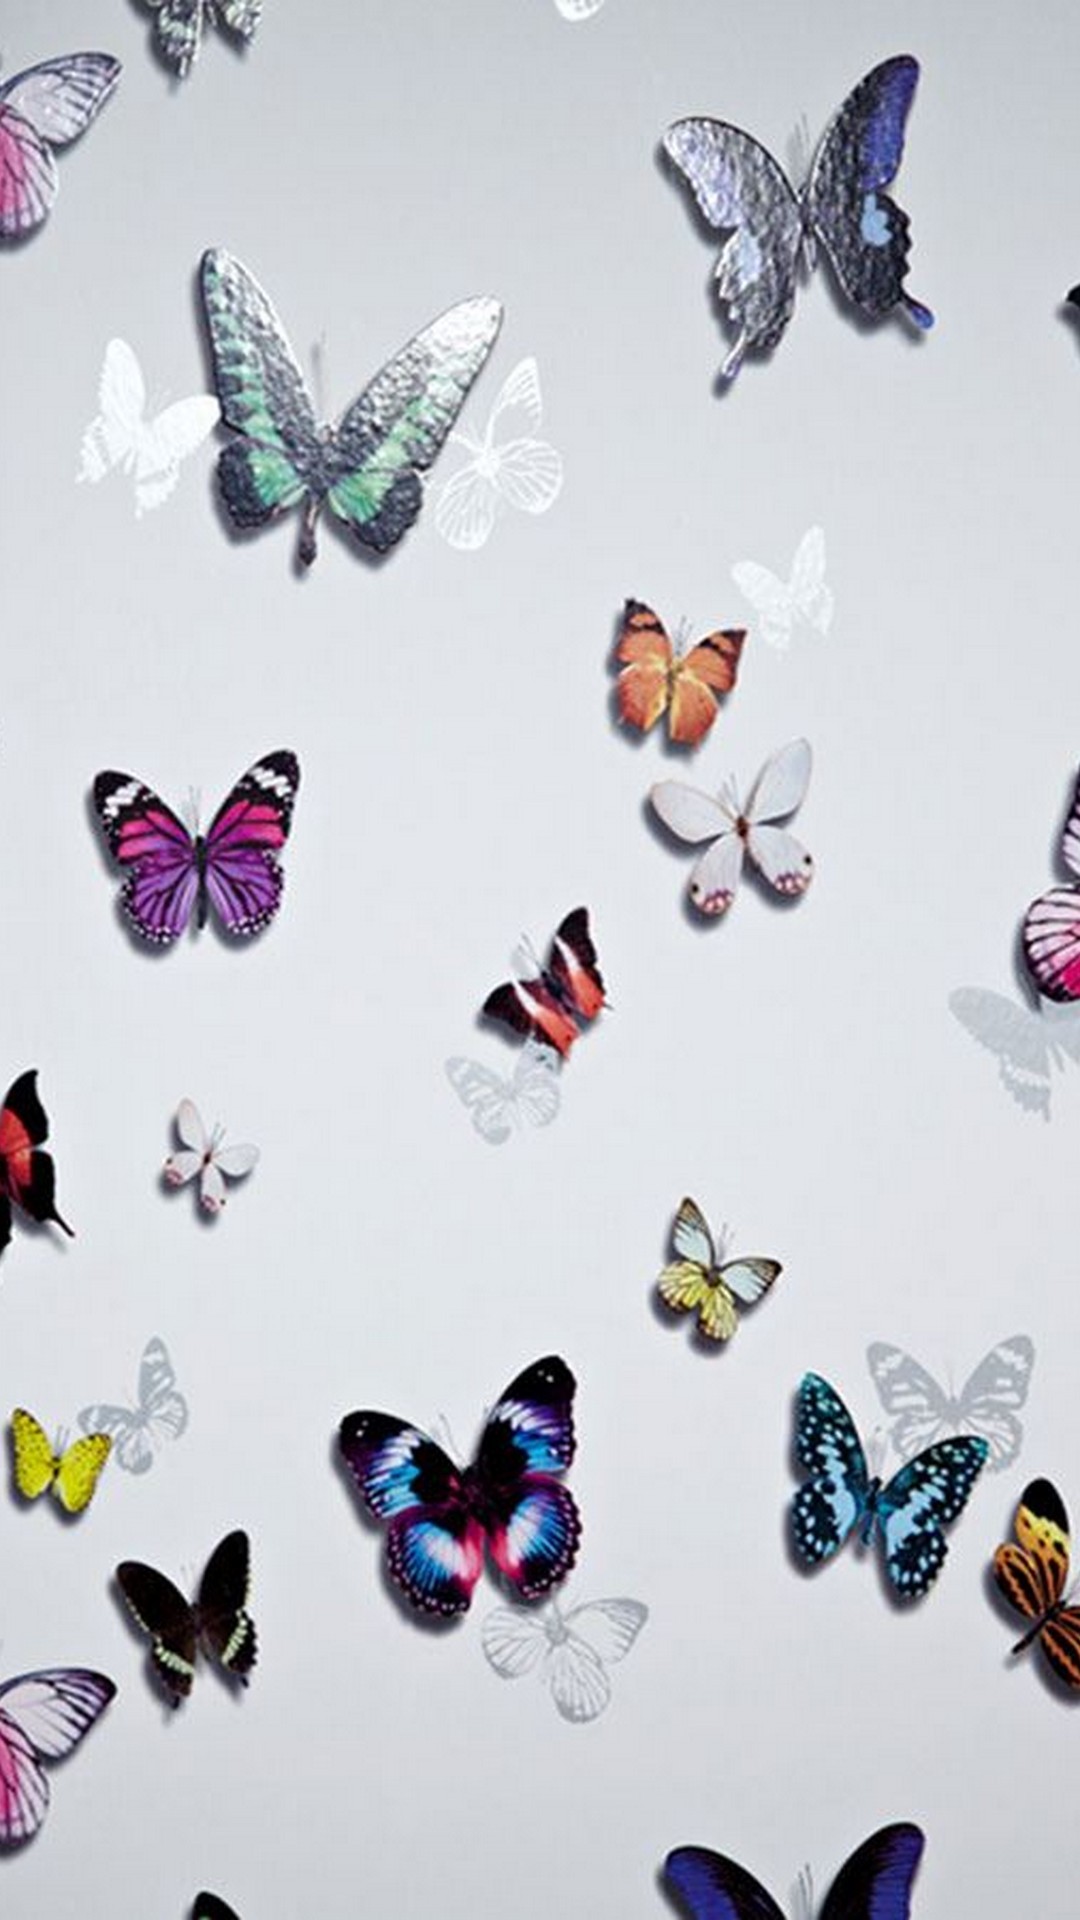 Butterfly HD Wallpaper For Android Android Wallpaper